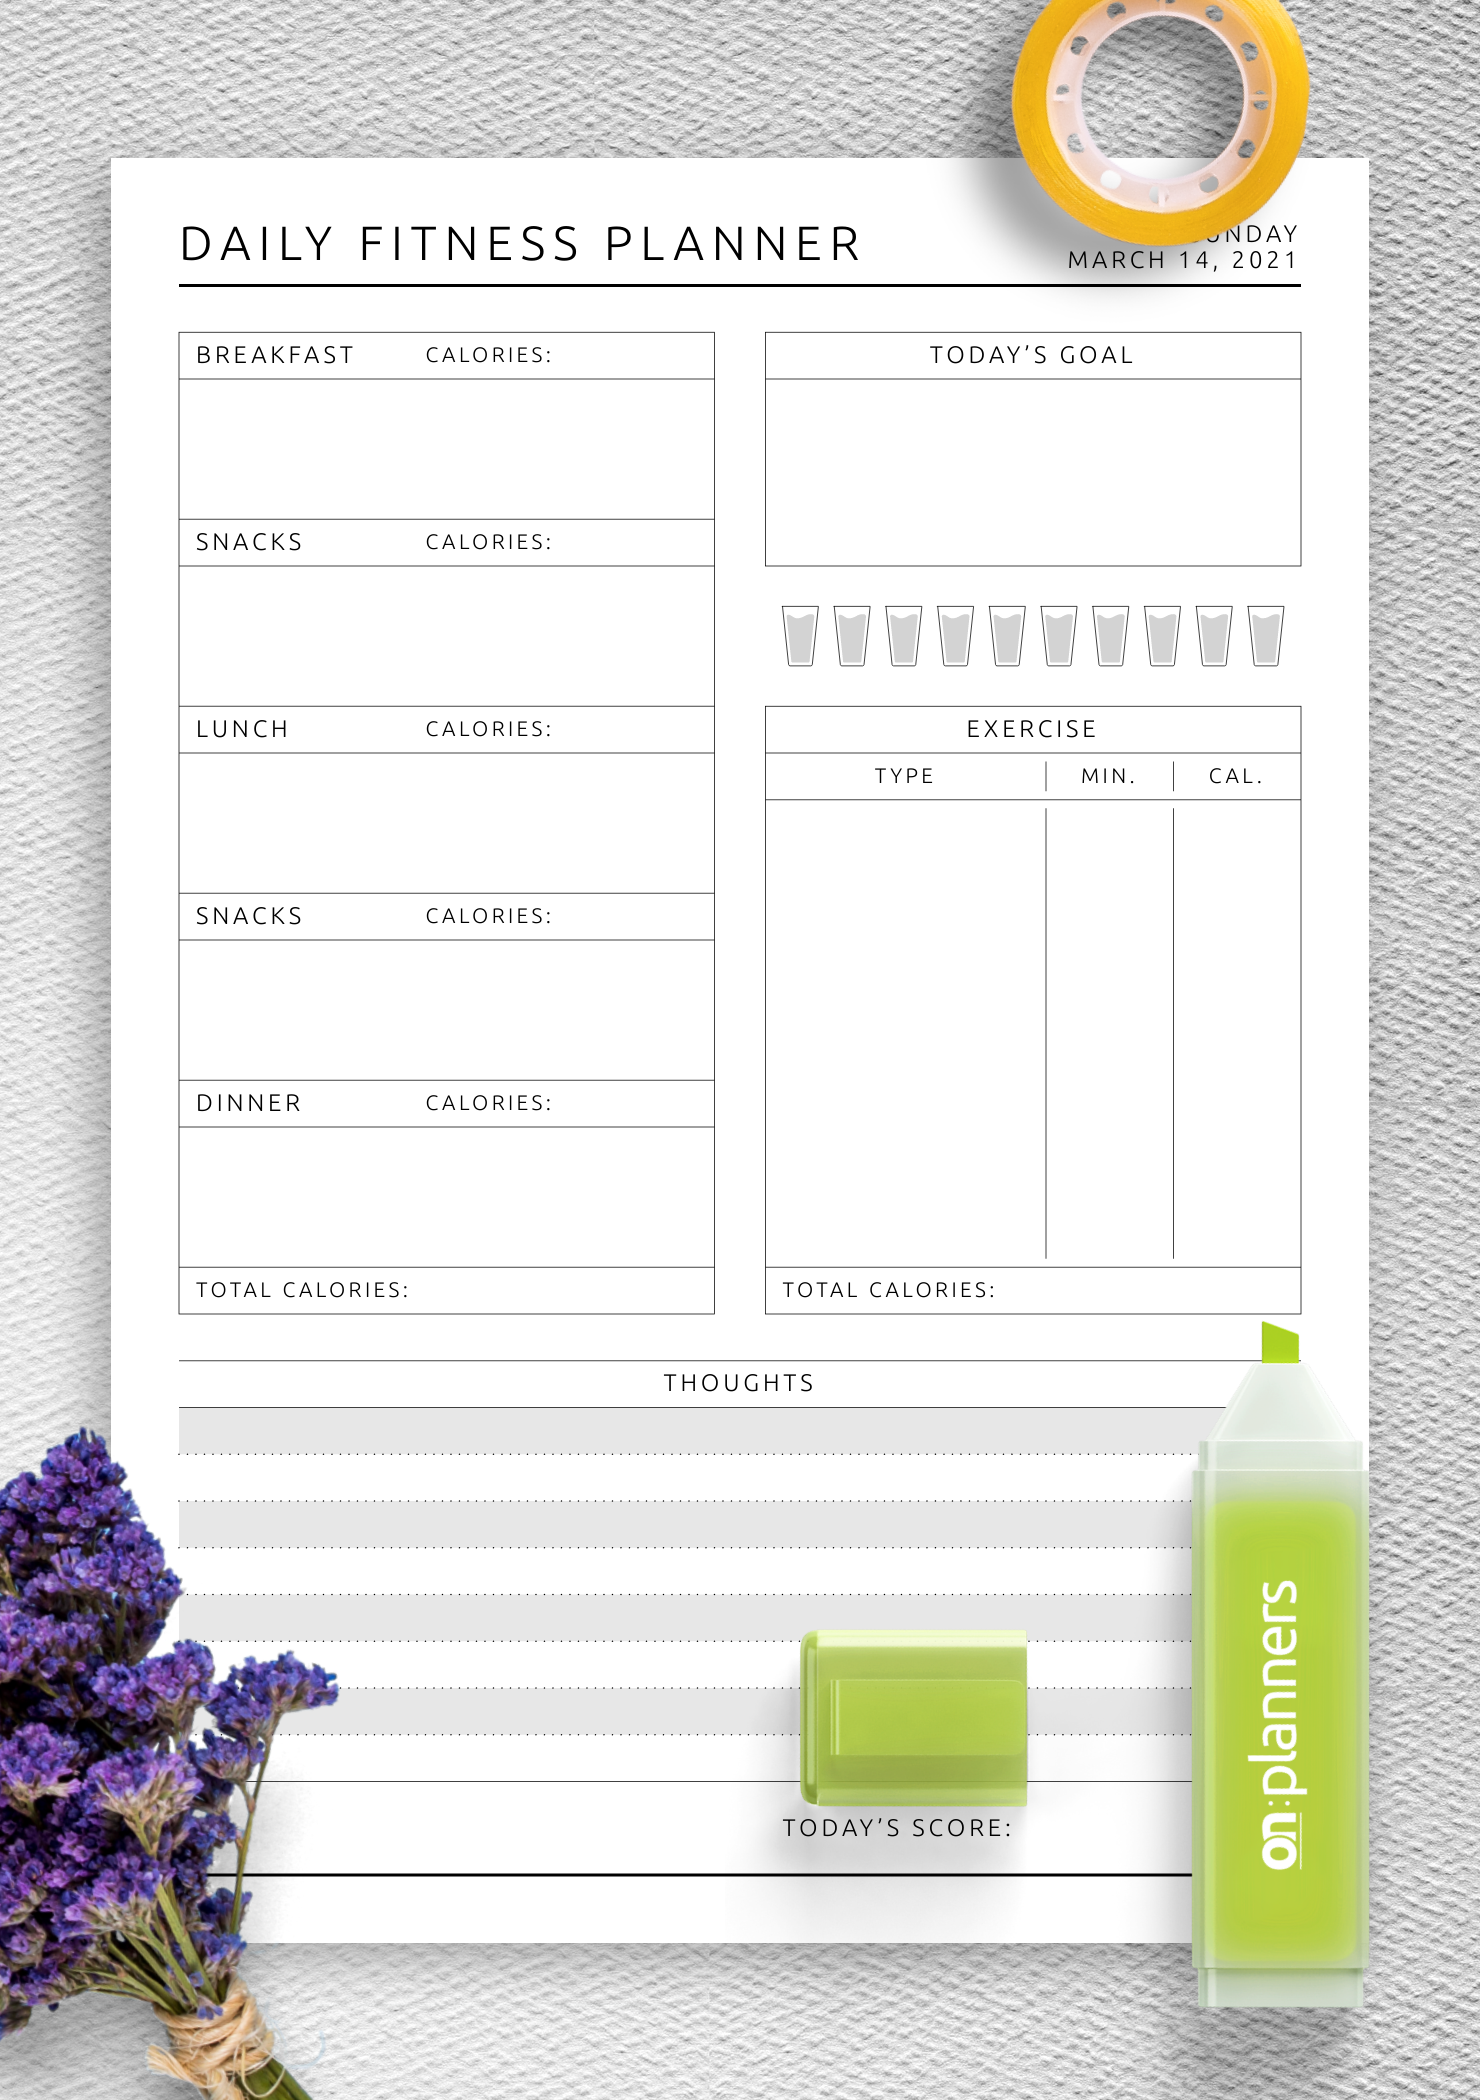 download-printable-daily-fitness-planner-template-pdf